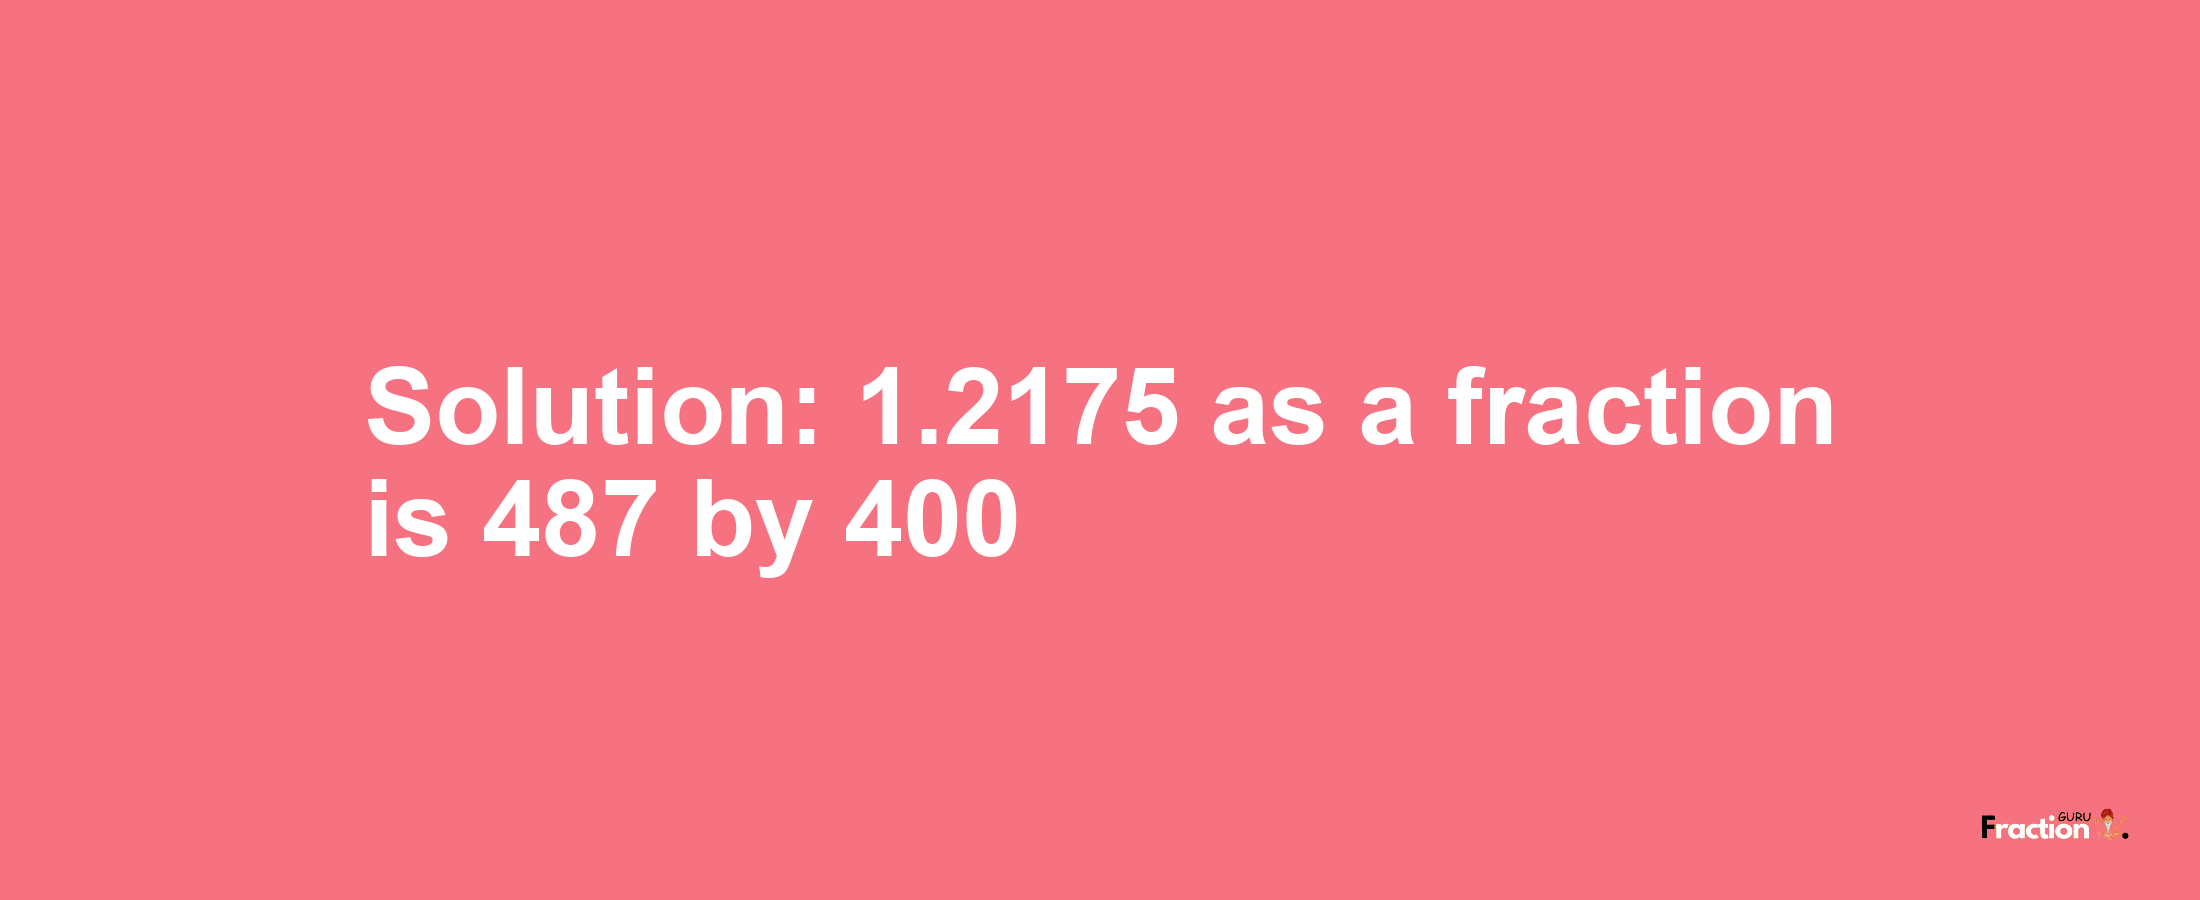 Solution:1.2175 as a fraction is 487/400